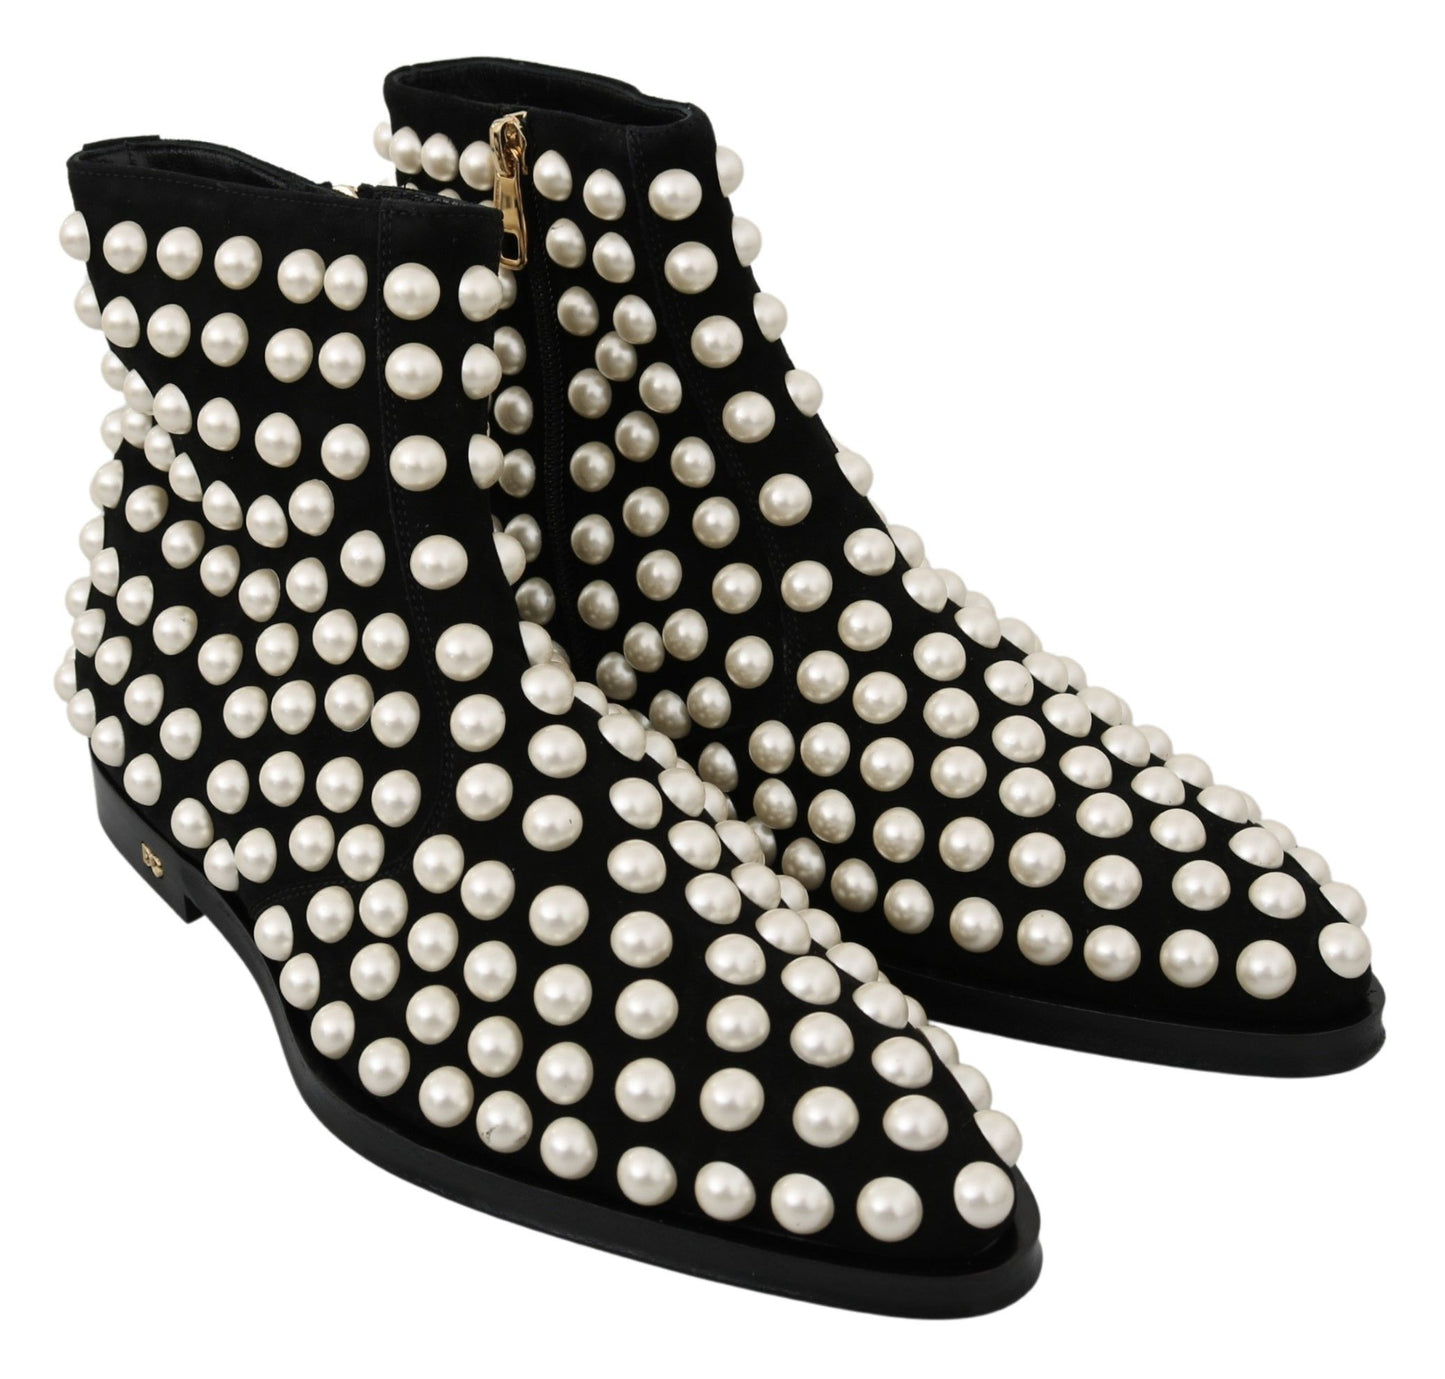 Chic Black Suede Ankle Boots with Pearls